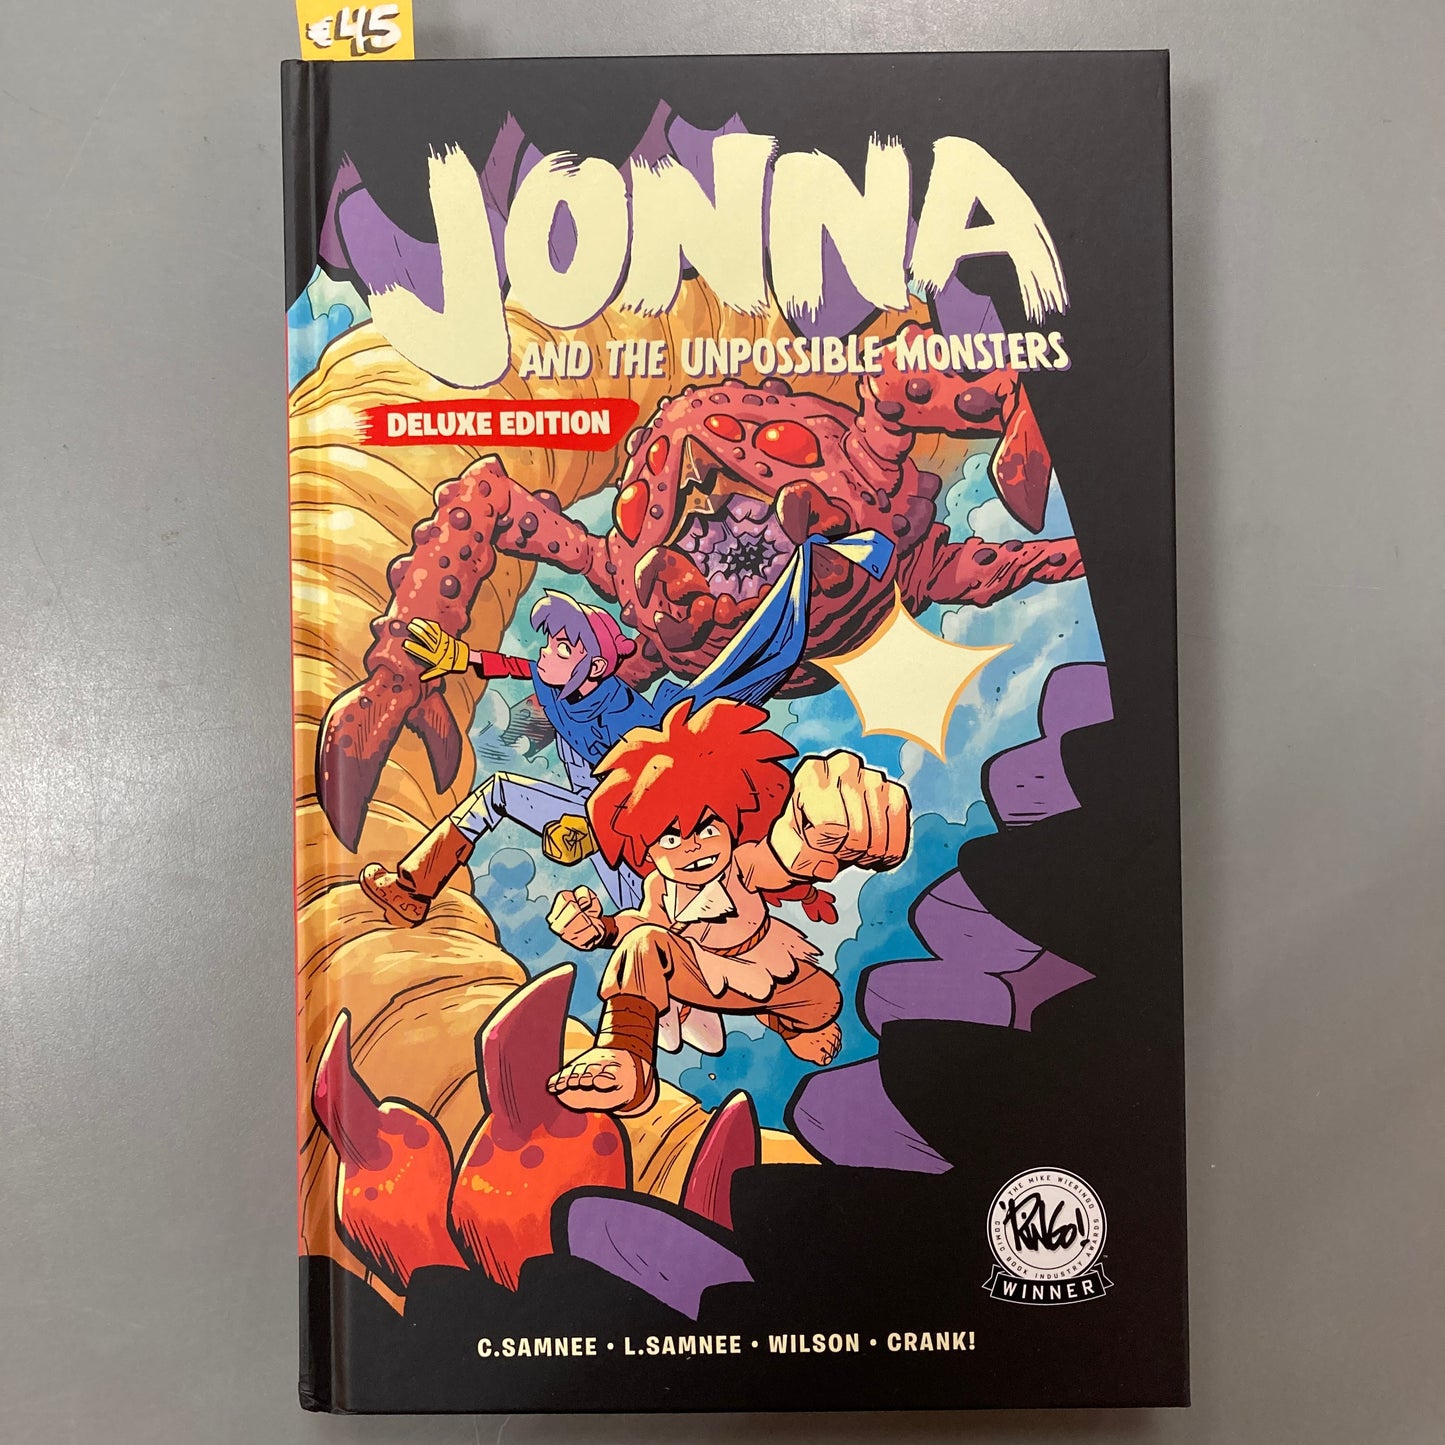 Jonna and the Unpossible Monsters, Deluxe Edition